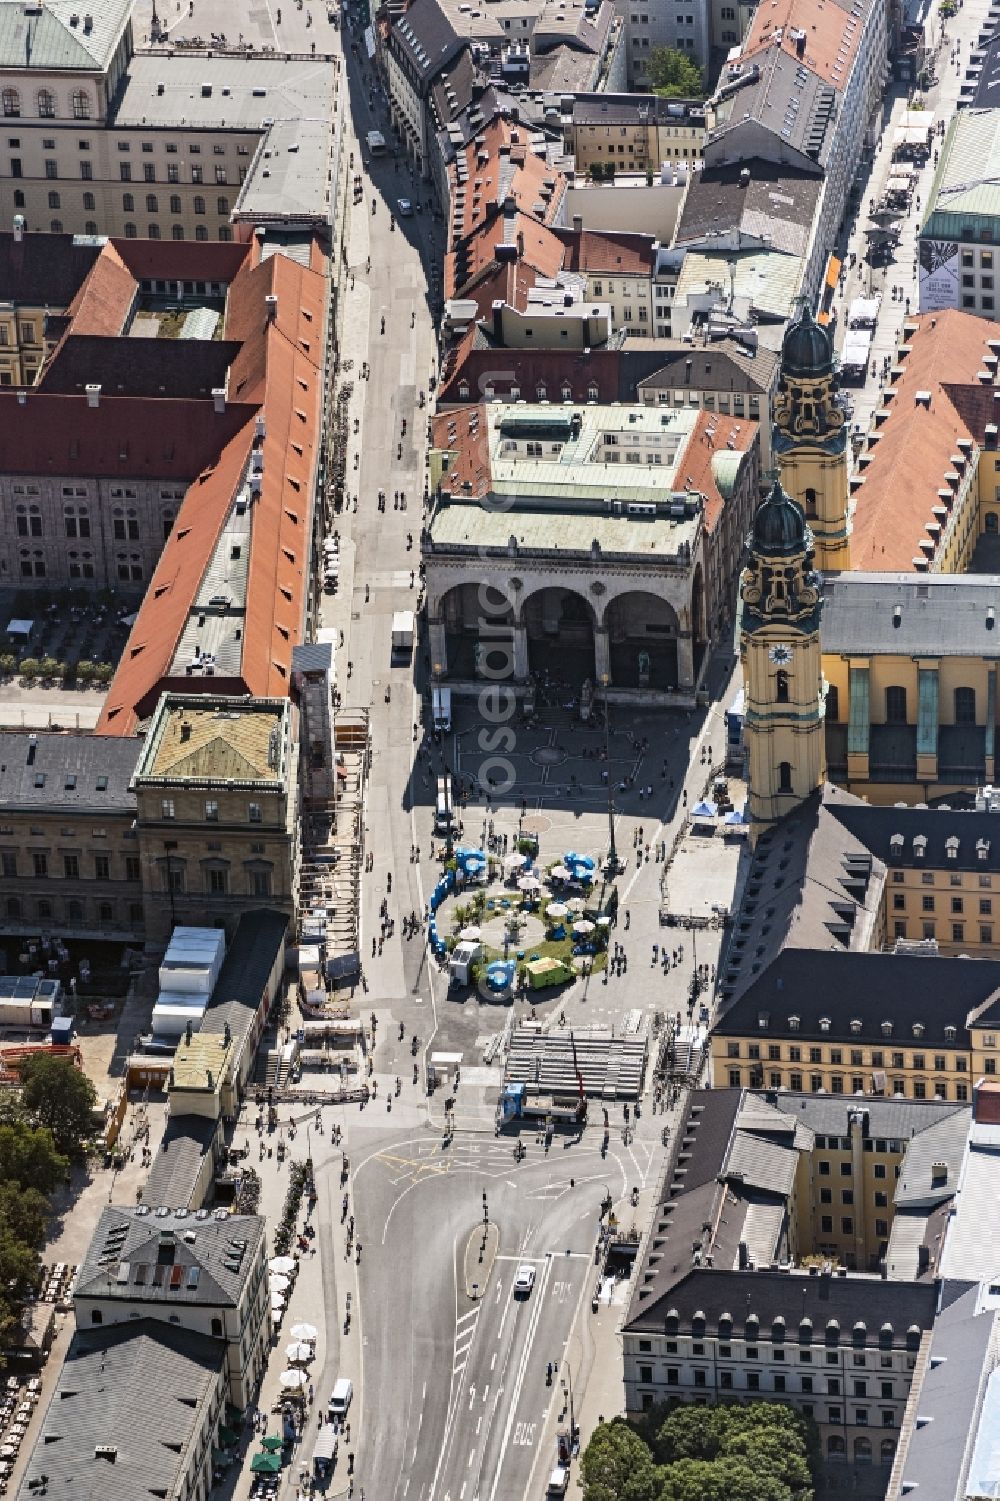 München from above - Feldherrnhalle and Theatine Church of St. Cajetan on the square Odeonsplatz in the Maxvorstadt part of Munich in the state of Bavaria. The Feldherrnhalle ( Field Marshals' Hall) is a monumental loggia on the southern edge of the square. Next to it is the catholic church, a former court and royal church of the Theatine Order. With its two towers in the italian late baroque style, it is part of the Odeon's Square complex of buildings and landmarks